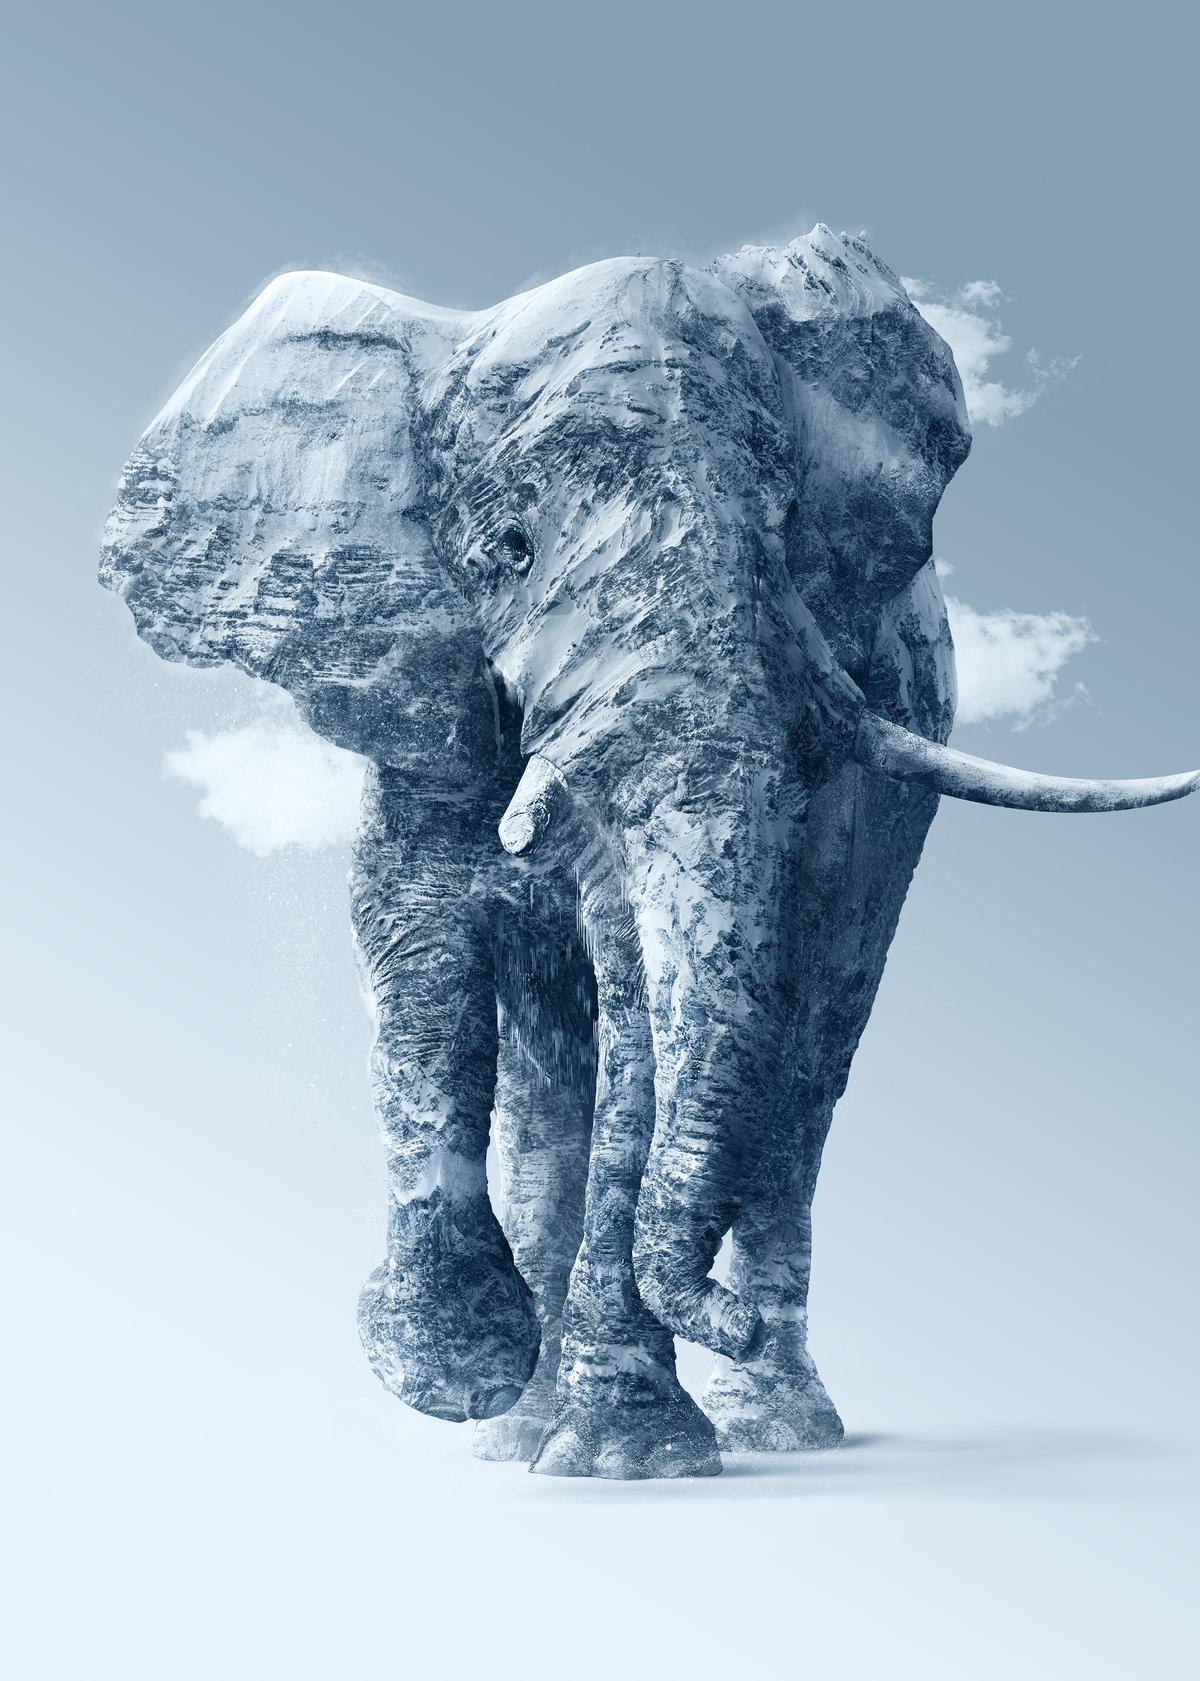 "Ourea" combines photos of the Alps to create a hybrid composite image of an African elephant. (Courtesy of <a href="https://www.instagram.com/joshdykgraaf/">Josh Dykgraaf</a>)